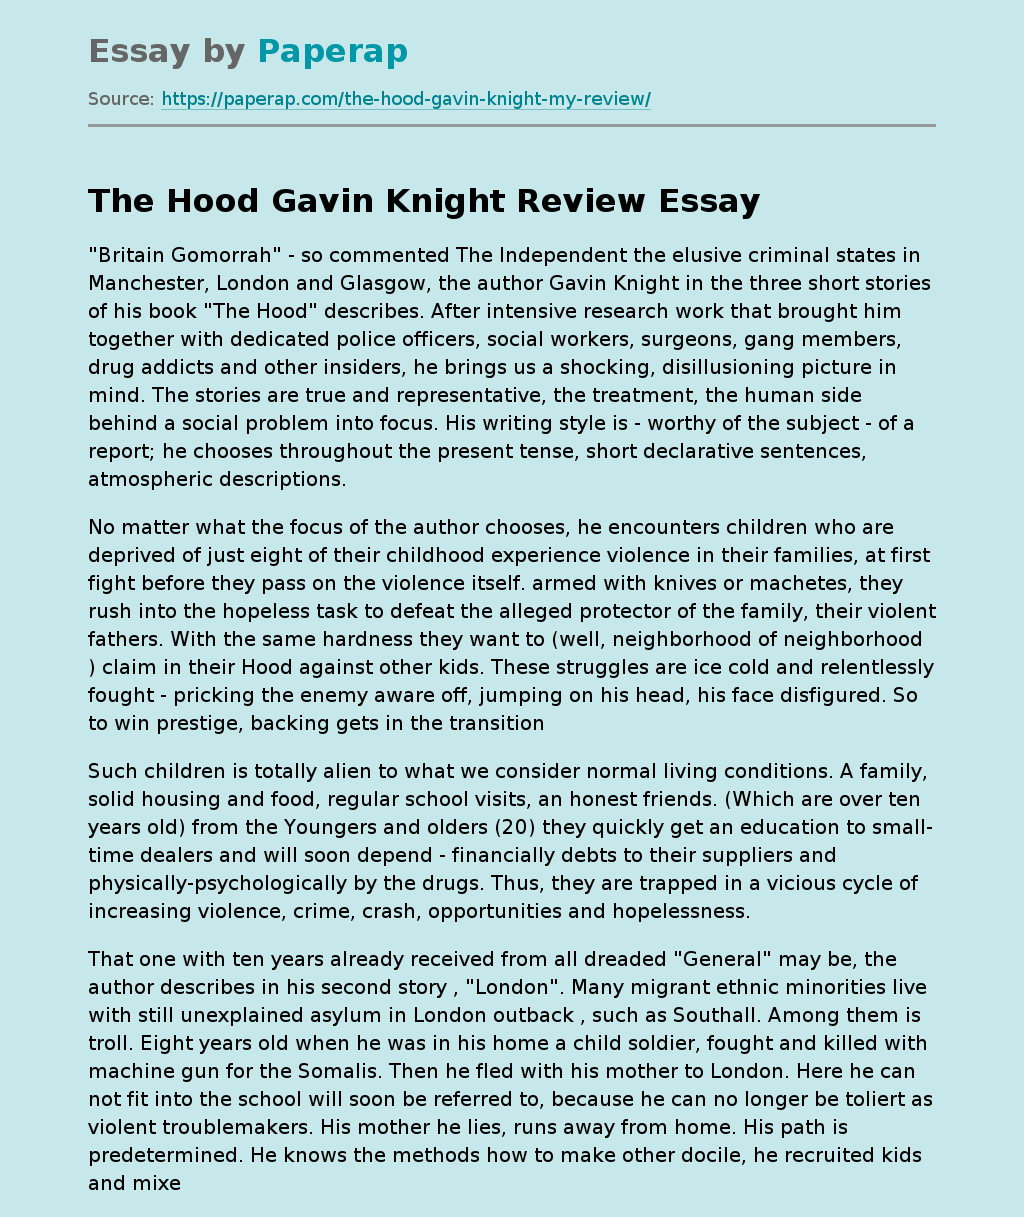 The Hood Gavin Knight Review